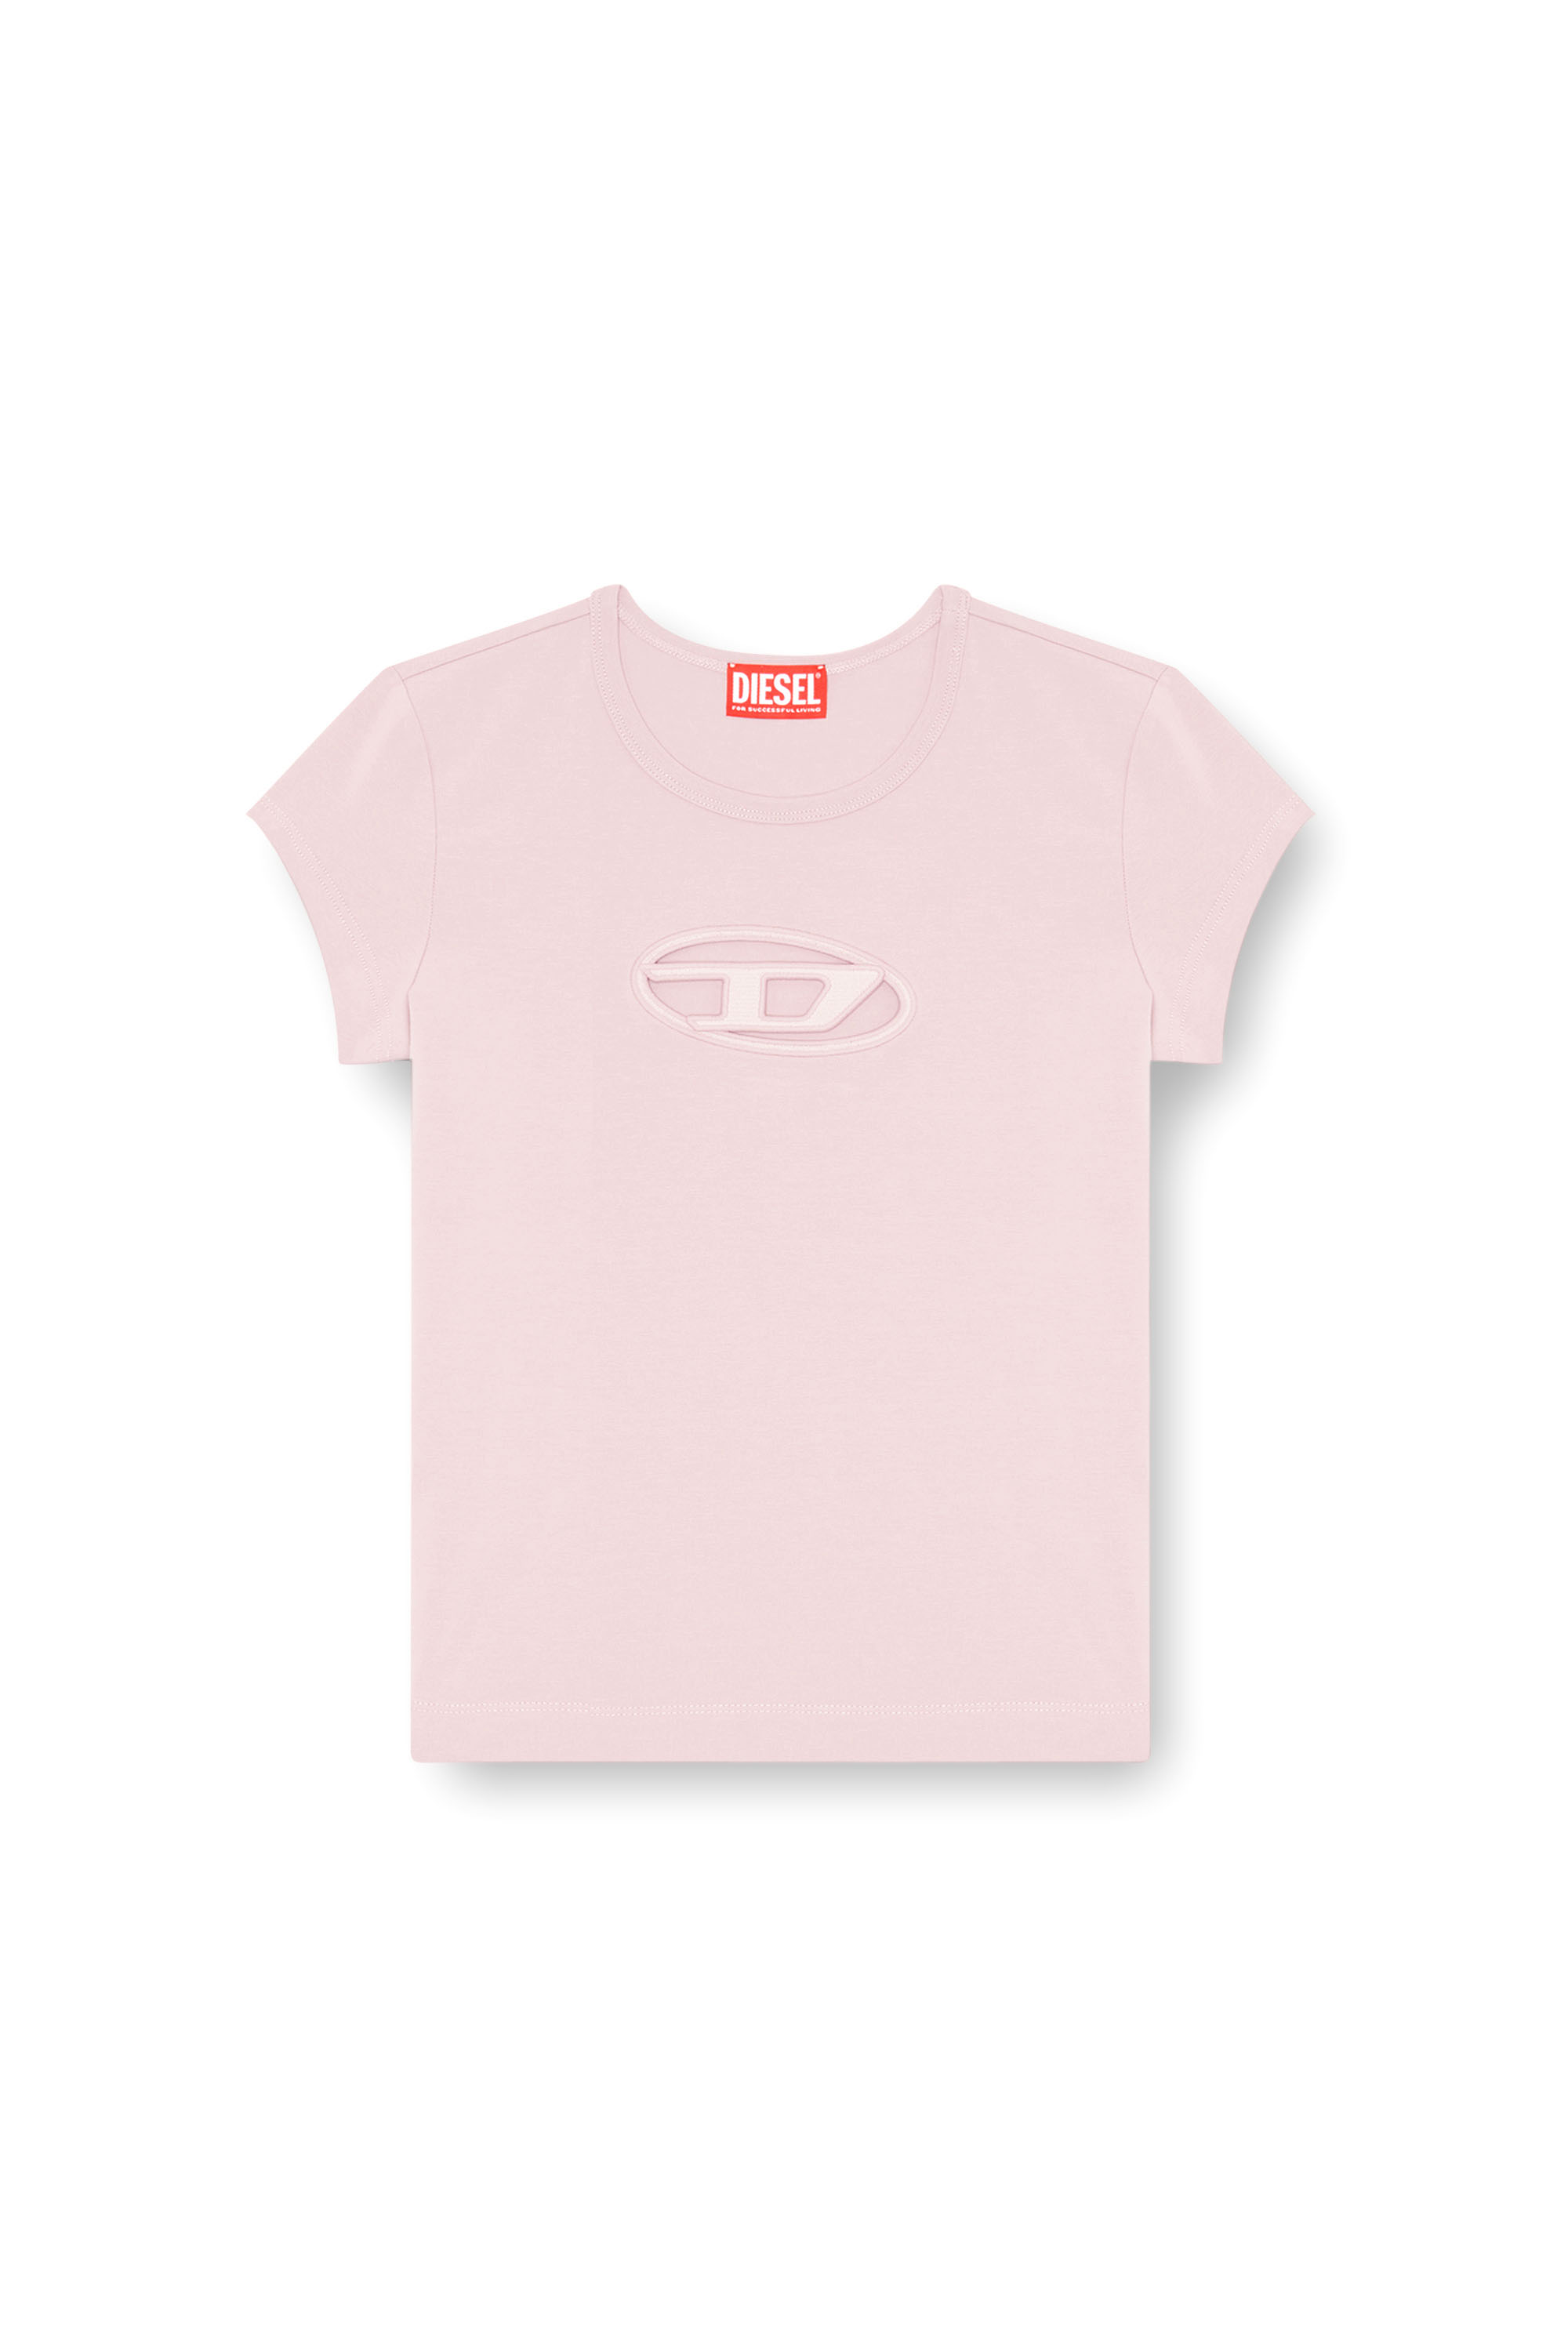 Diesel - T-ANGIE, Donna T-shirt con logo peekaboo in Rosa - Image 4